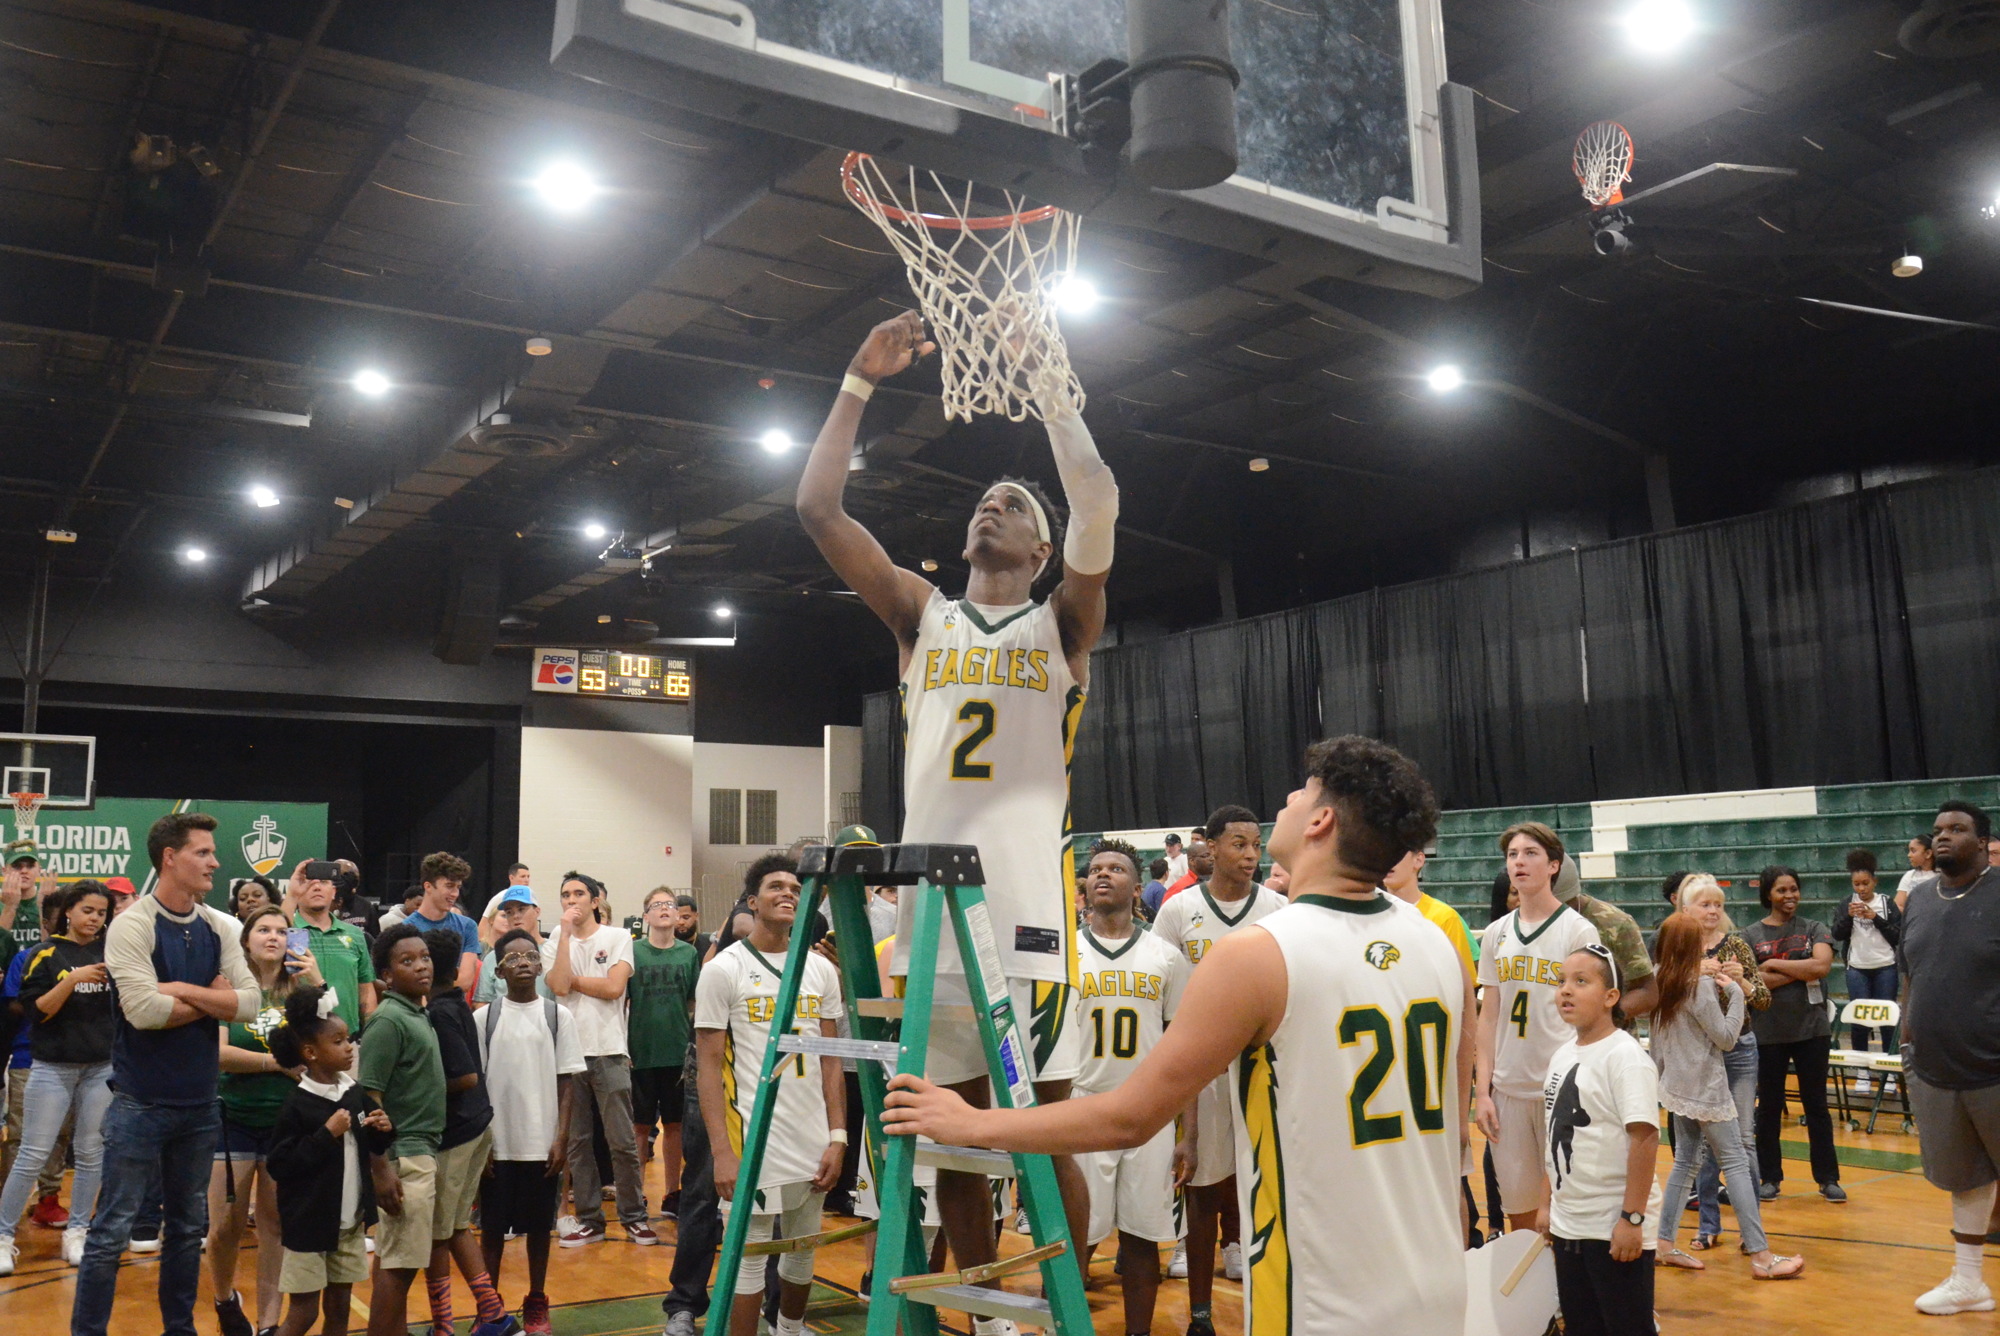 The CFCA Eagles cut down the nets at their home gym after winning a trip to the FHSAA Final Four in Lakeland.